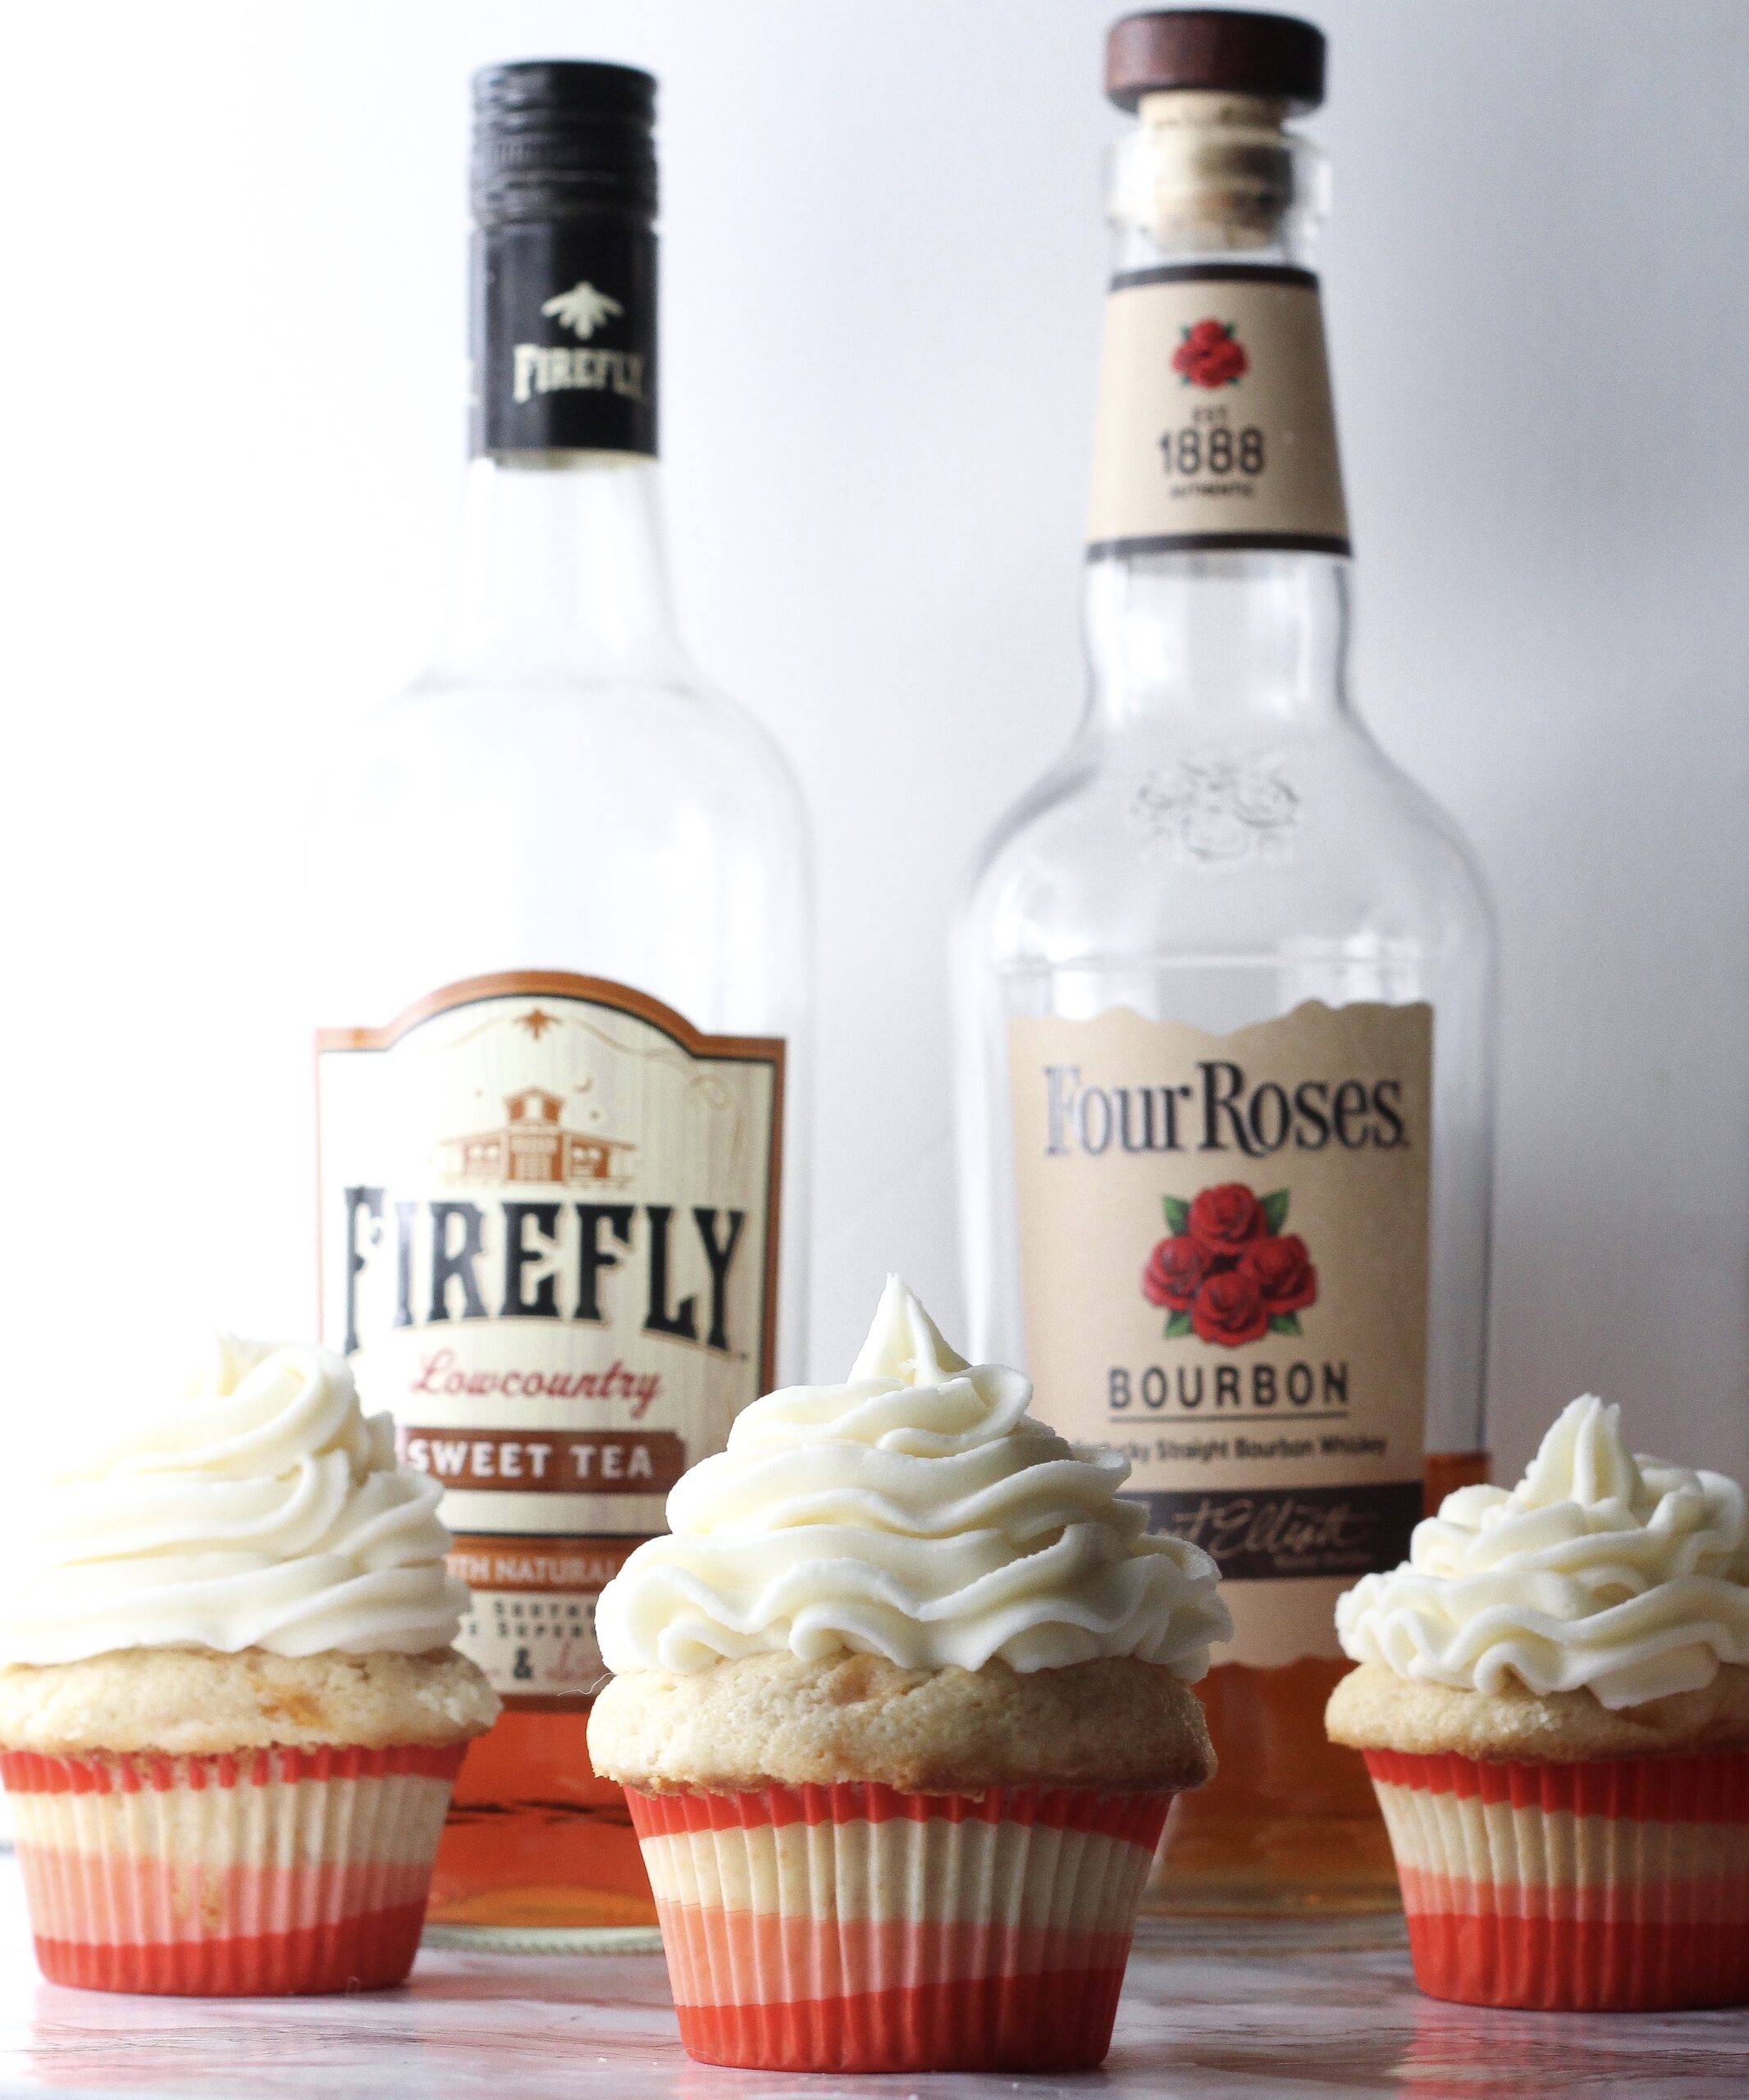 three bourbon peach sweet tea cupcakes in front of a bottle of firefly sweet tea vodka and a bottle of four roses bourbon